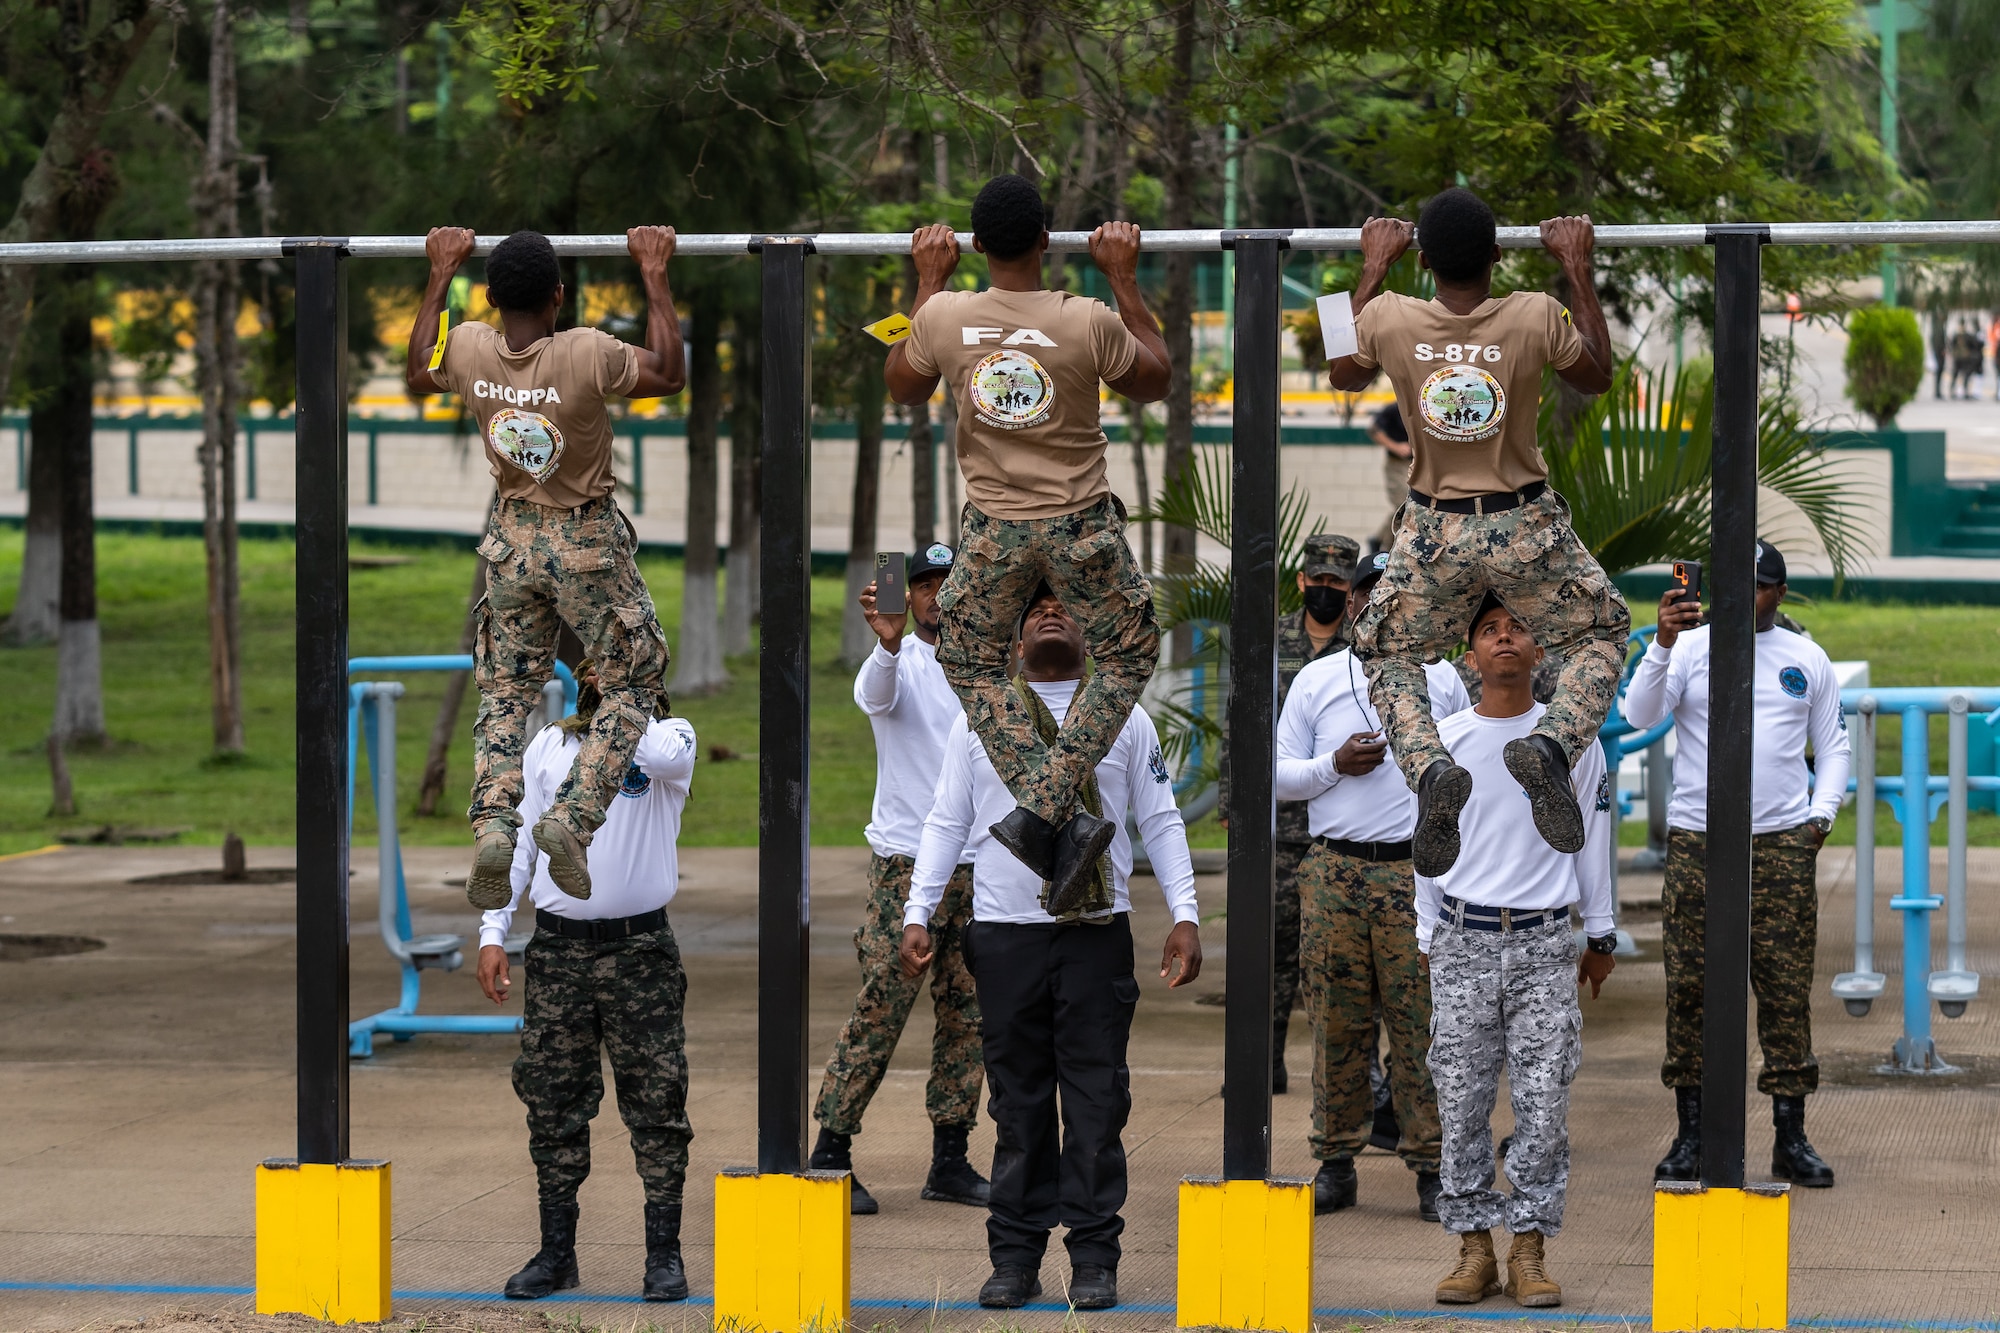 Jamaica team members perform the pullup portion of the Physical Training Test as part of the first event for Fuerzas Comando 2022, on June 13, 2022, in Tegucigalpa, Honduras.